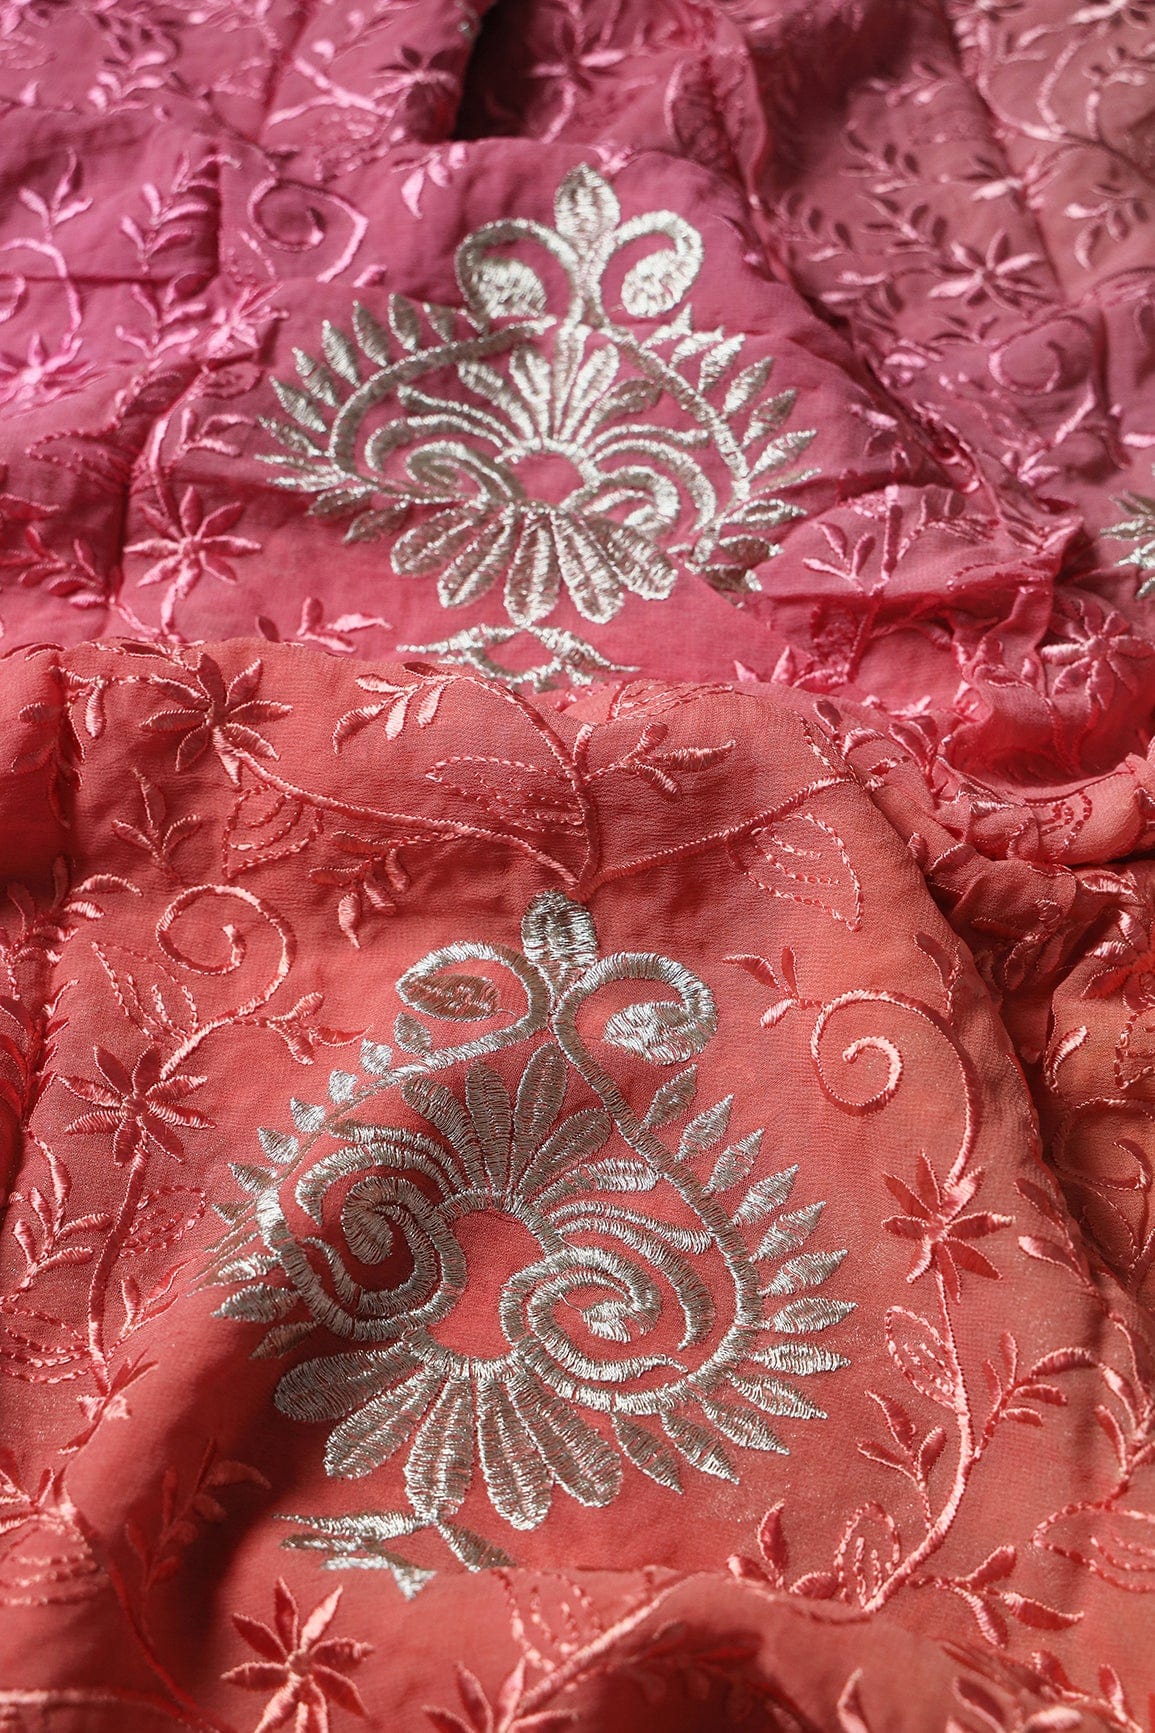 doeraa Embroidery Fabrics Copy of 1.50 Meter Cut Piece Of Multi Thread With Zari Floral Embroidery On Multi Color Viscose Georgette Fabric